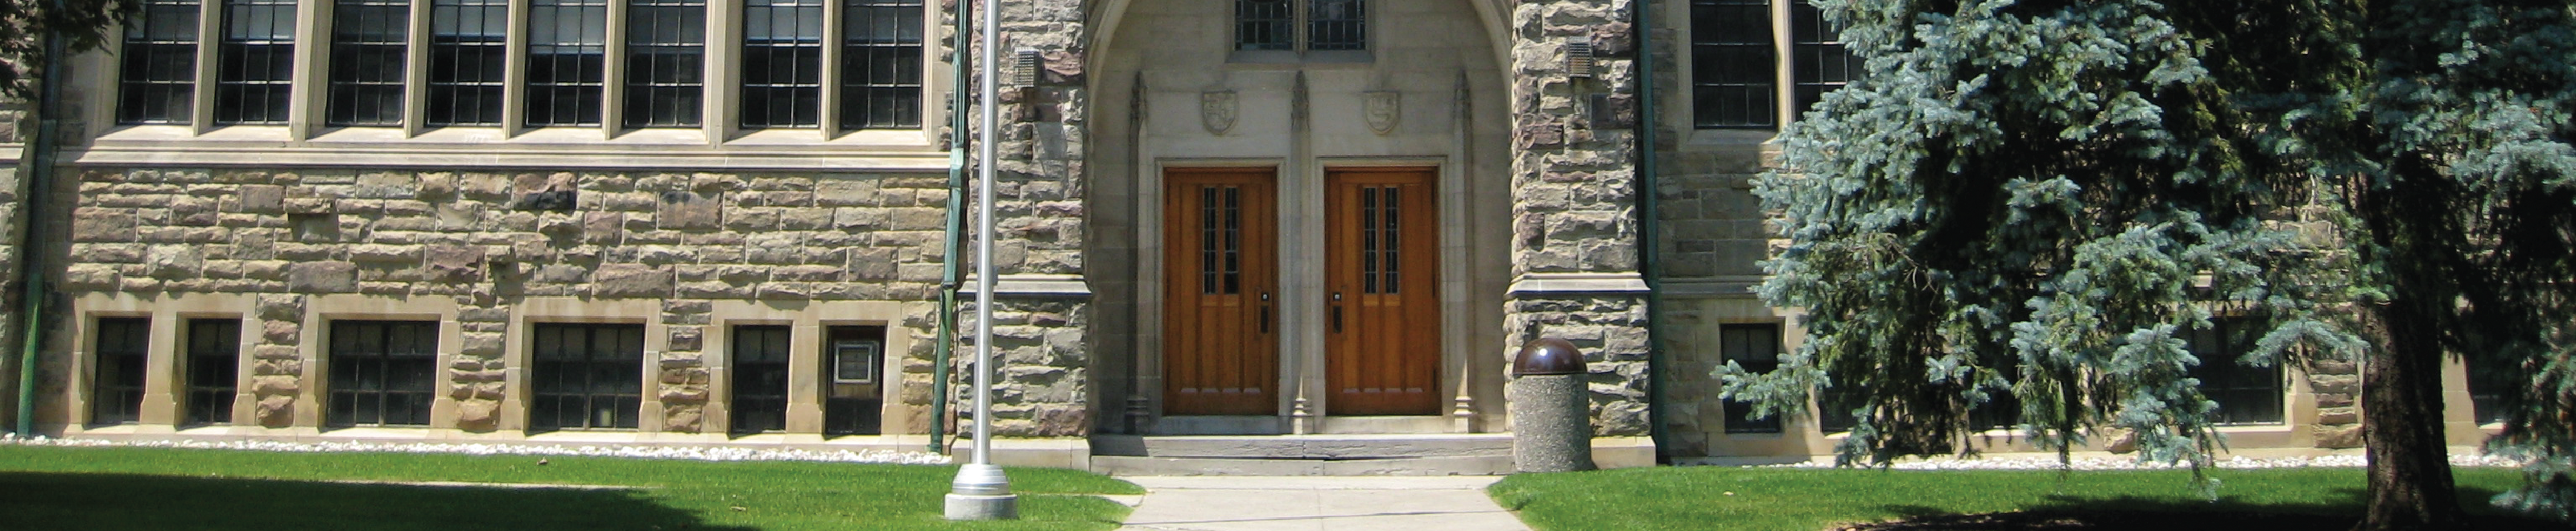 The front entrance of Loretto Abbey Catholic Secondary School